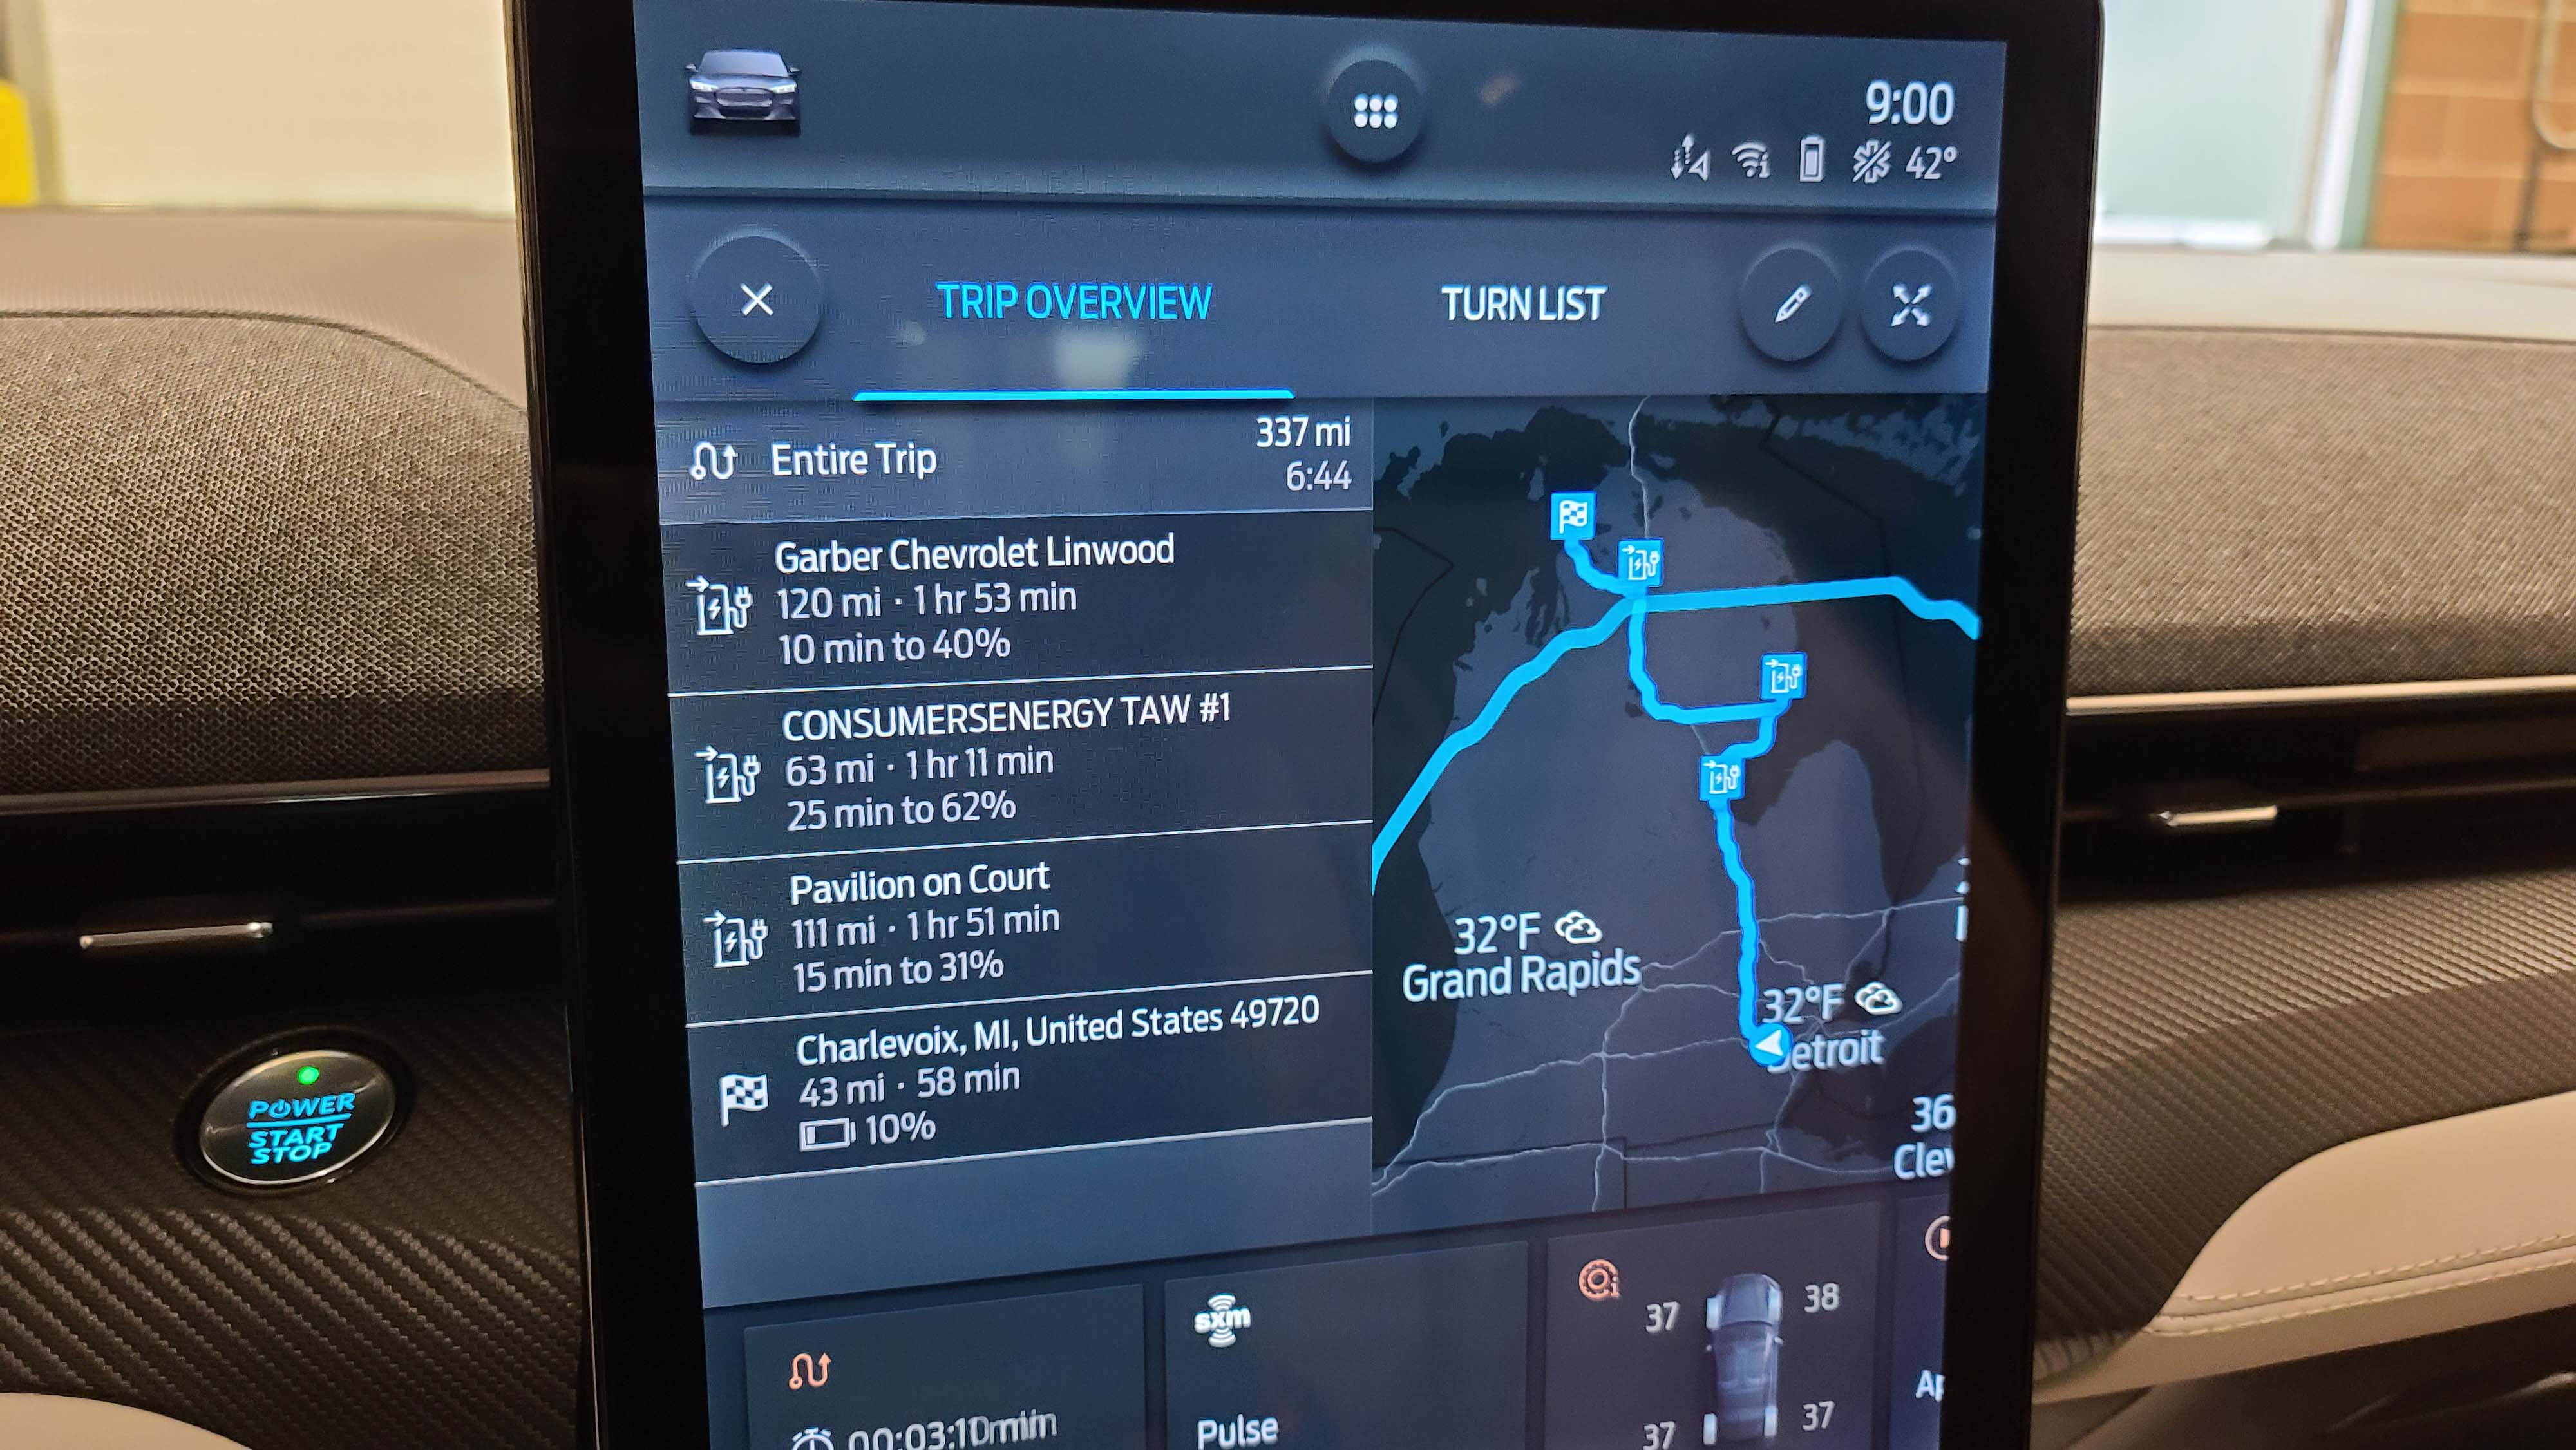 To get to, say, Charlevoix from Ypsilanti, Michigan with 207 miles on the battery (300 is full charge), the 2021 Ford Mustang Mach-E Extended Range model will have to hopscotch between EV chargers. Ford offers a holistic plan that allows Mach-E owners to pay charging costs under one umbrella plan.